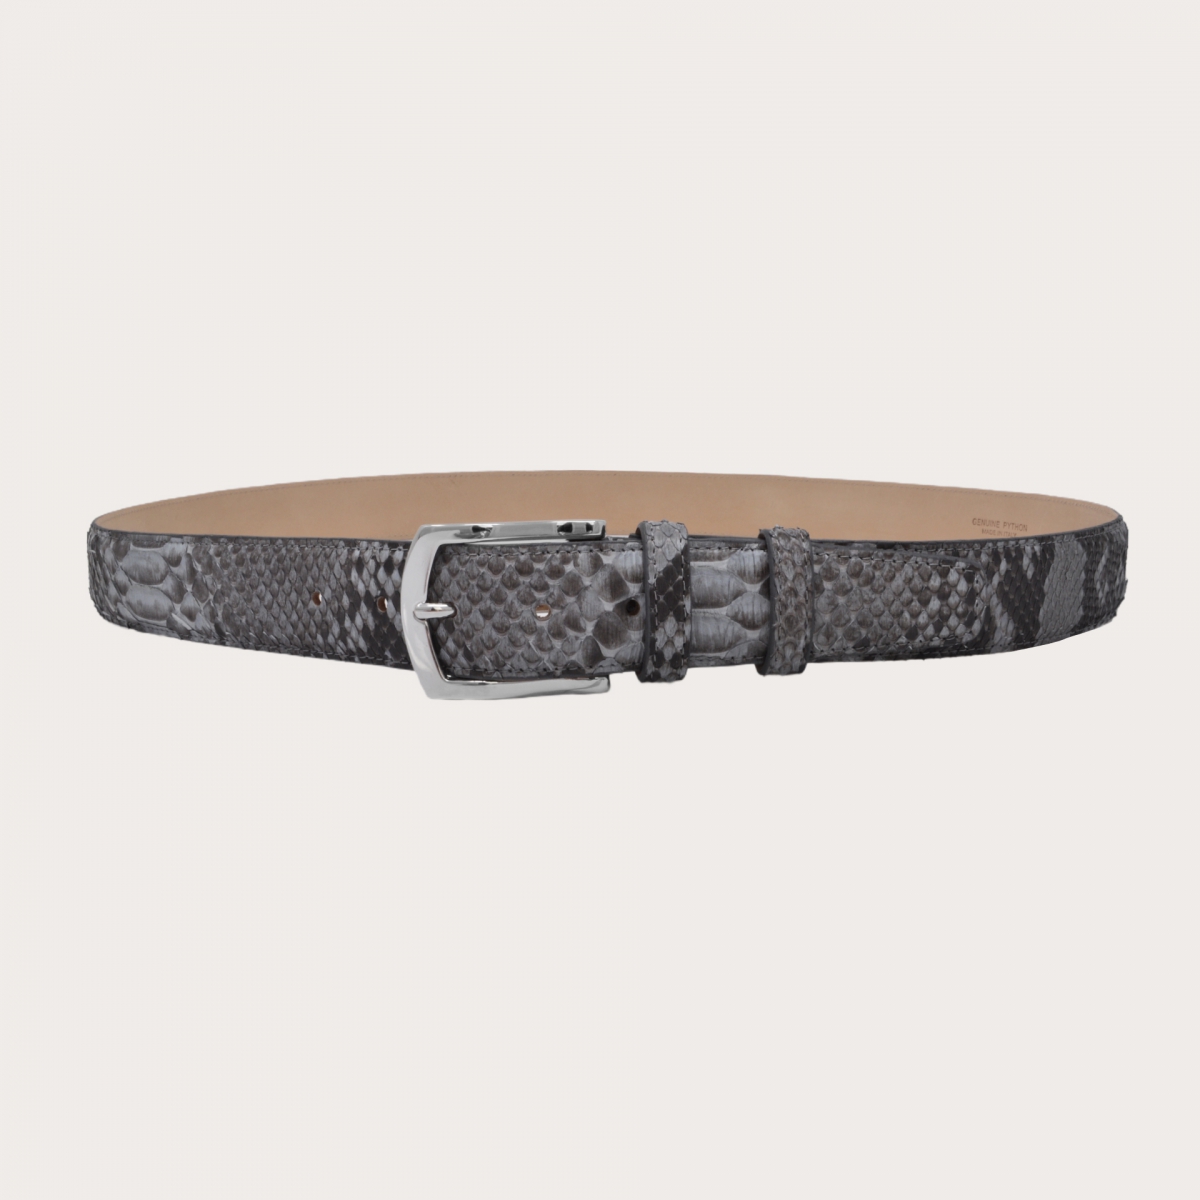 BRUCLE Hand-buffed H35 python leather belt with silver shiny buckle, dusty blue